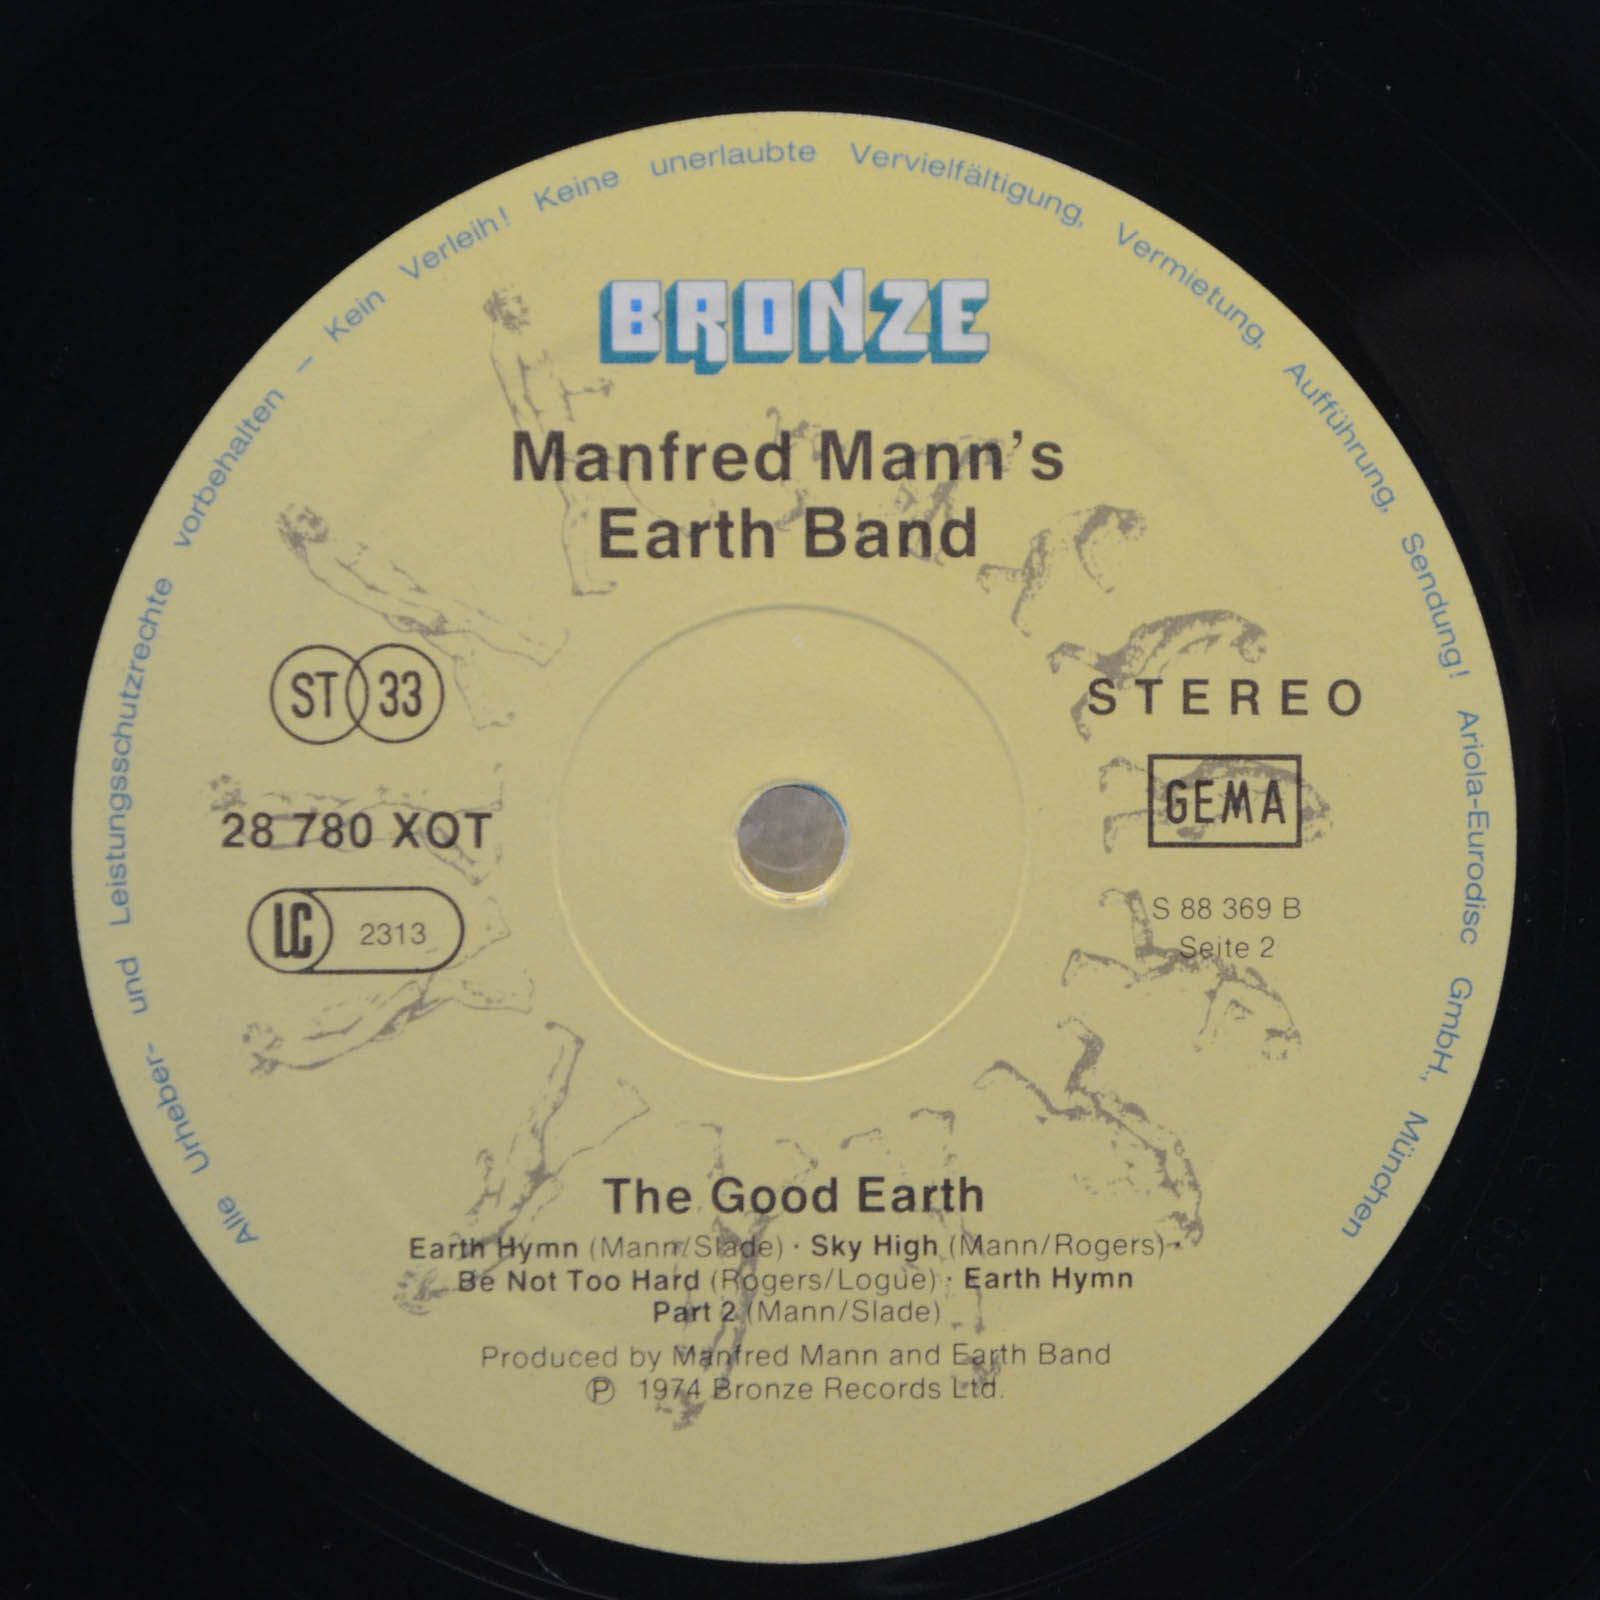 Manfred Mann's Earth Band — The Good Earth, 1973